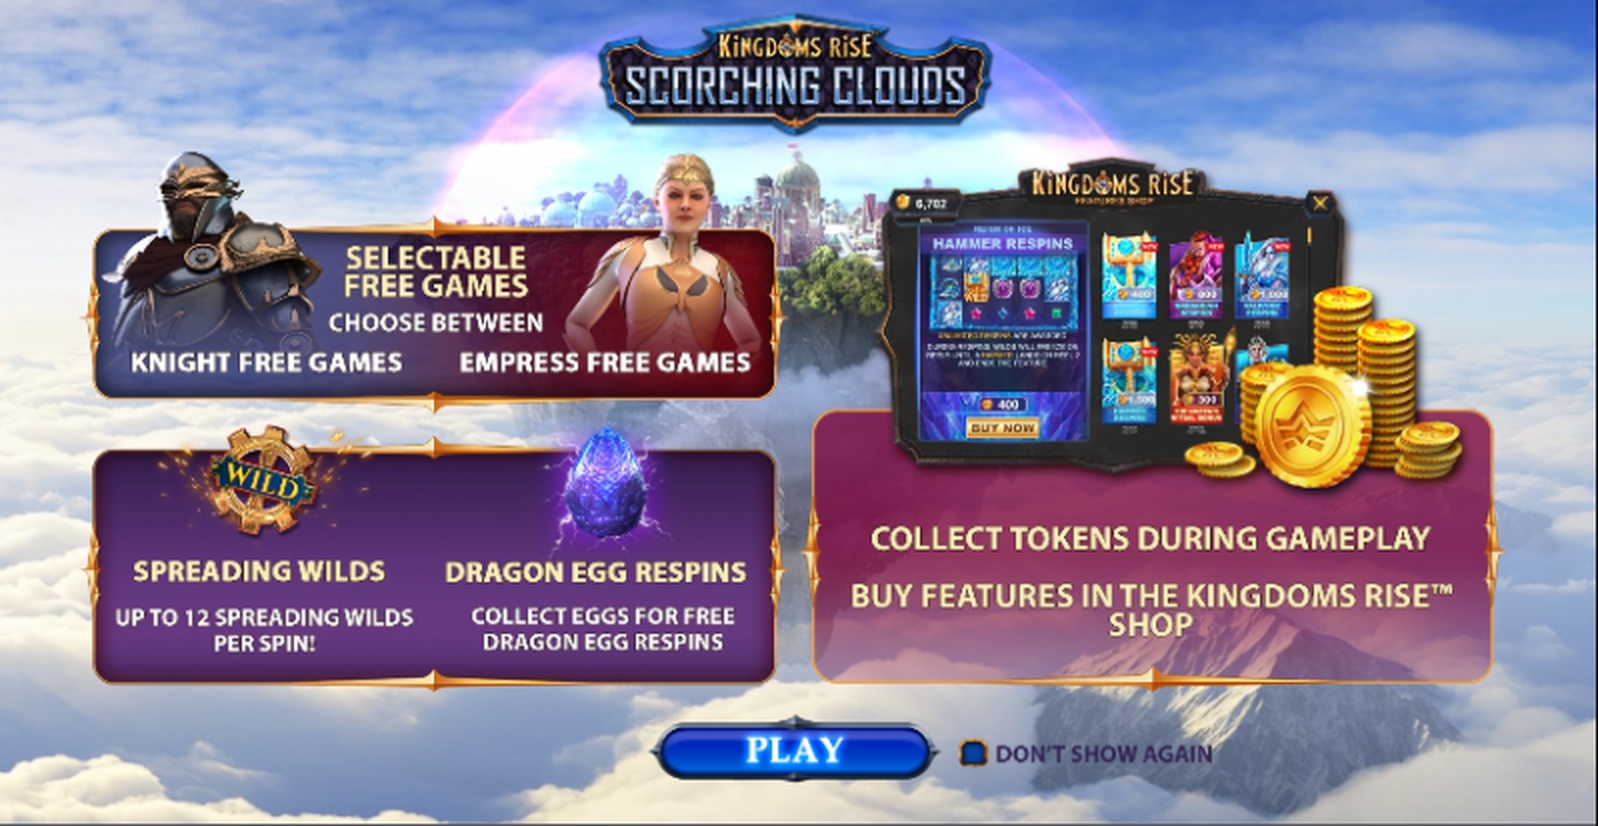 The Kingdoms Rise: Scorching Clouds Online Slot Demo Game by SUNfox Games